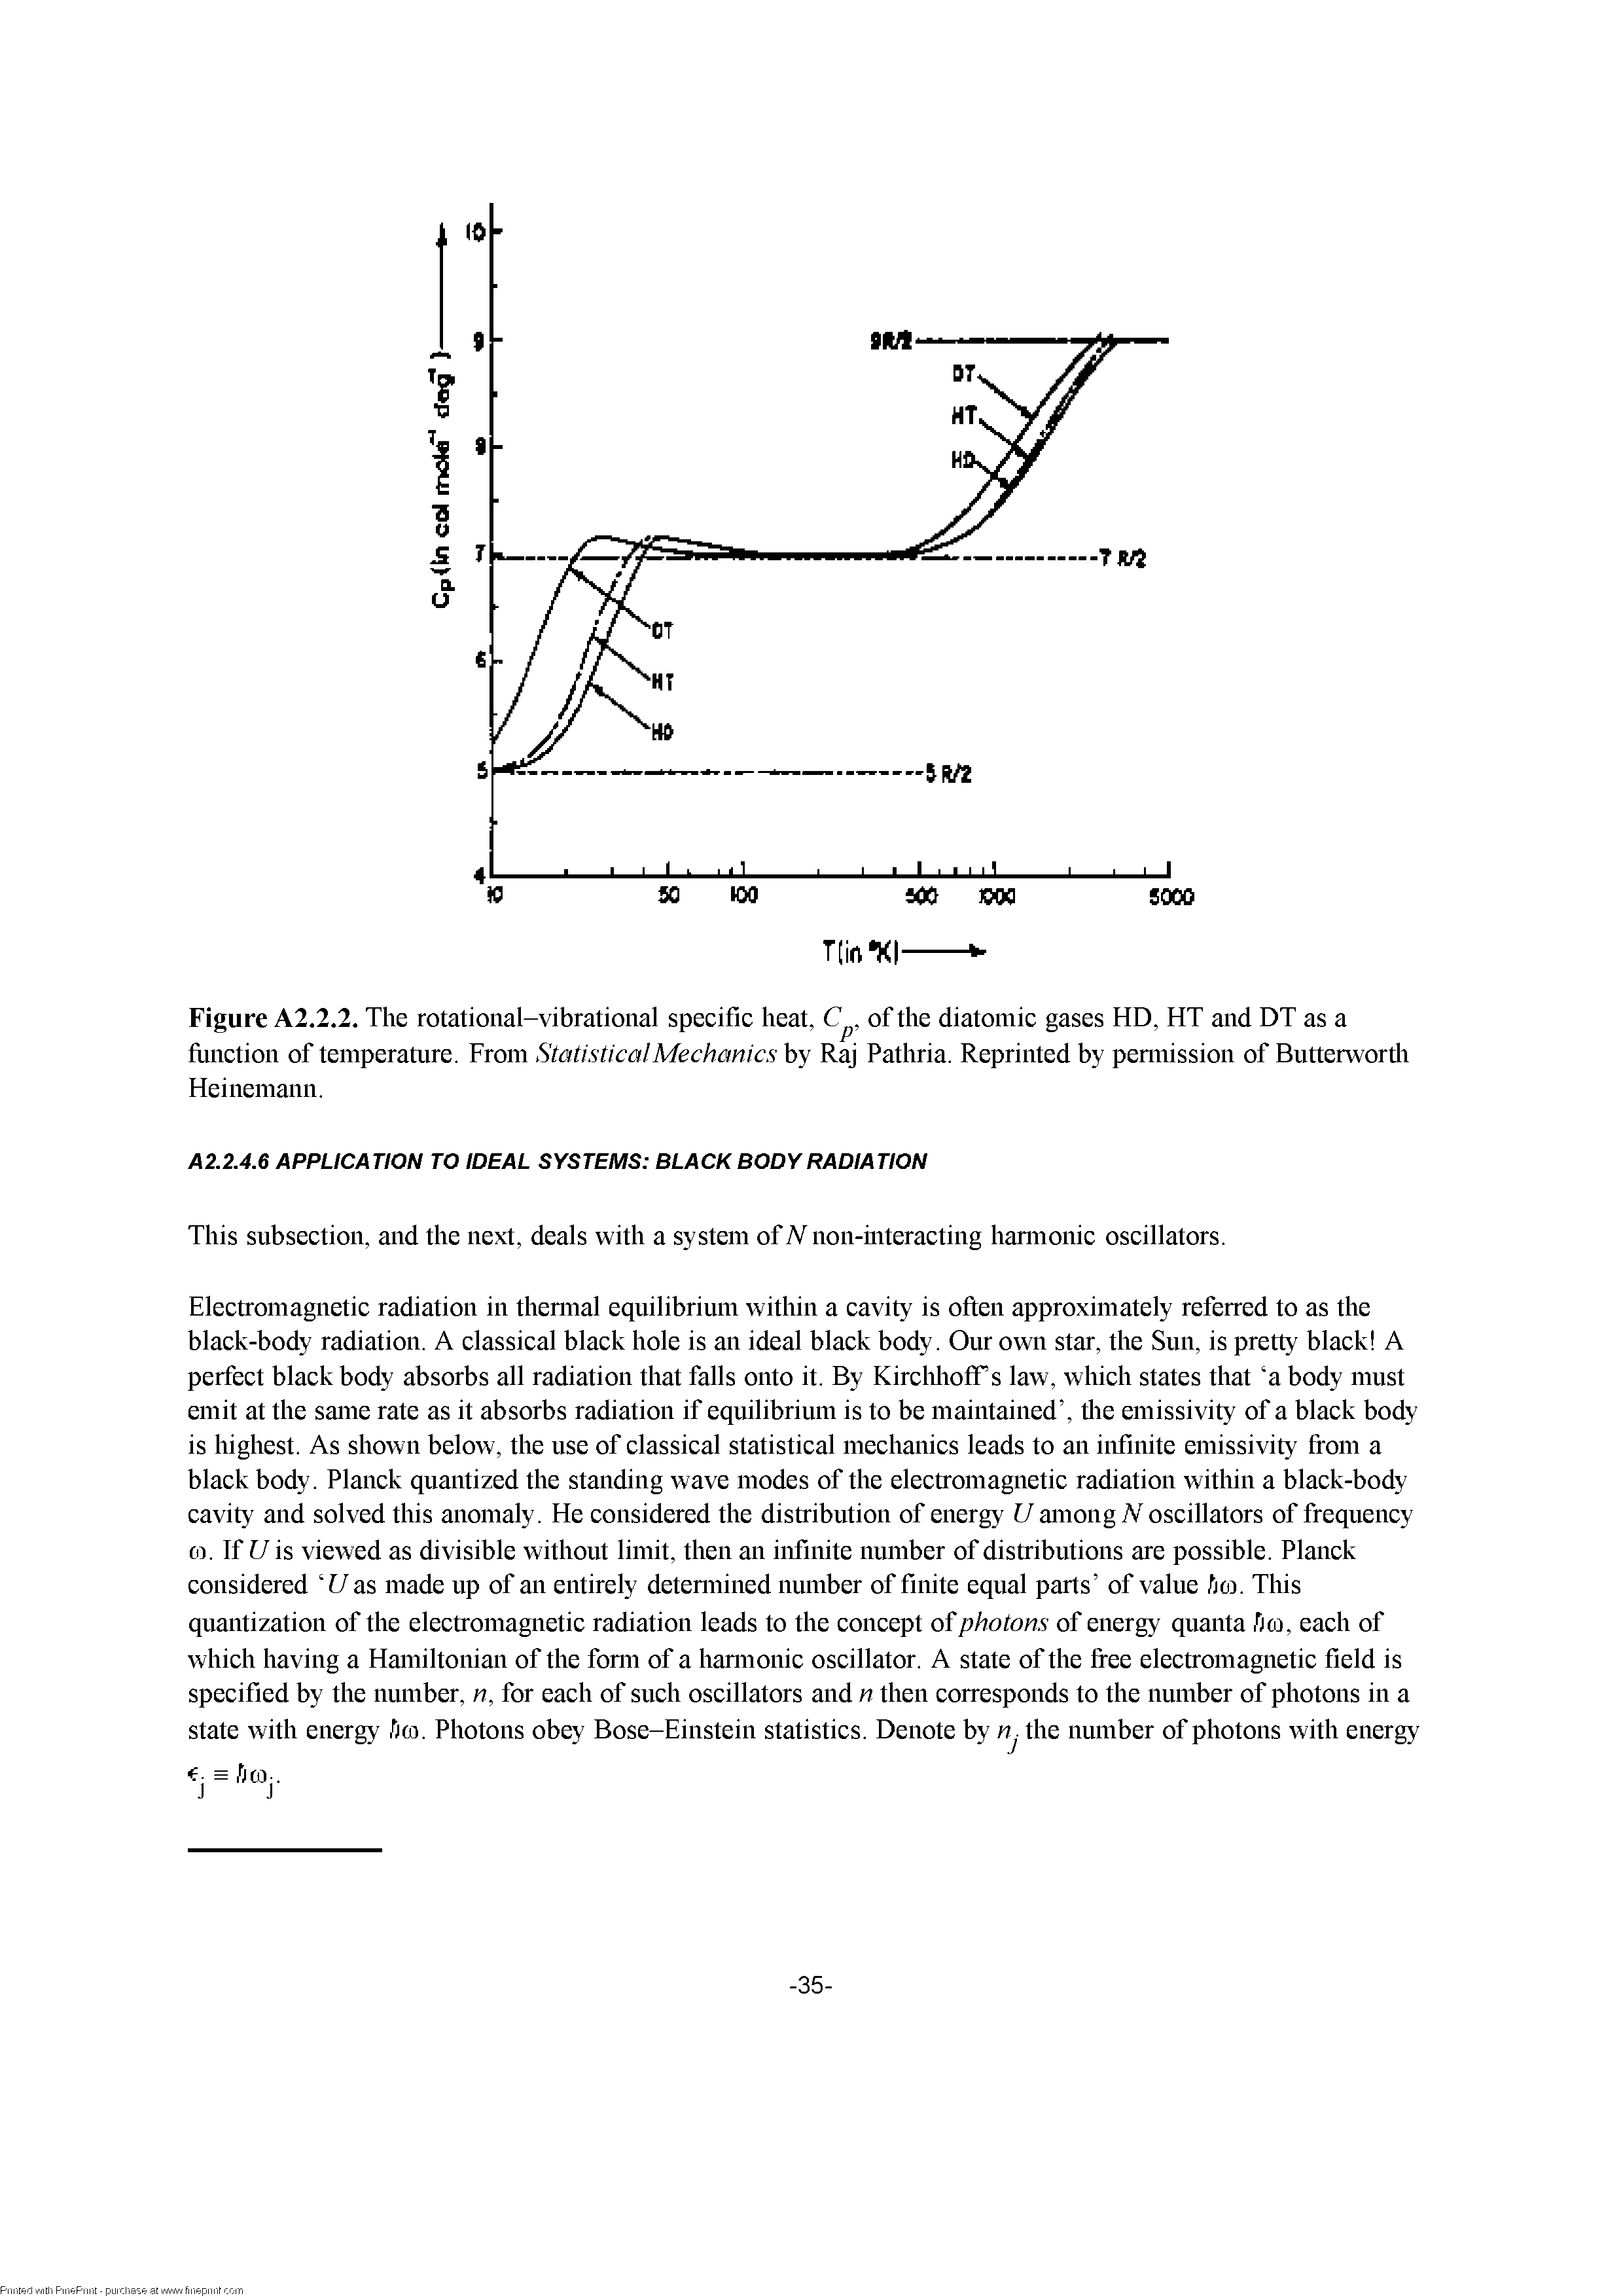 Figure A2.2.2. The rotational-vibrational specific heat, C, of the diatomic gases HD, HT and DT as a fiinction of temperature. From Statistical Mechanics by Raj Pathria. Reprinted by pennission of Butterwortii Heinemann.